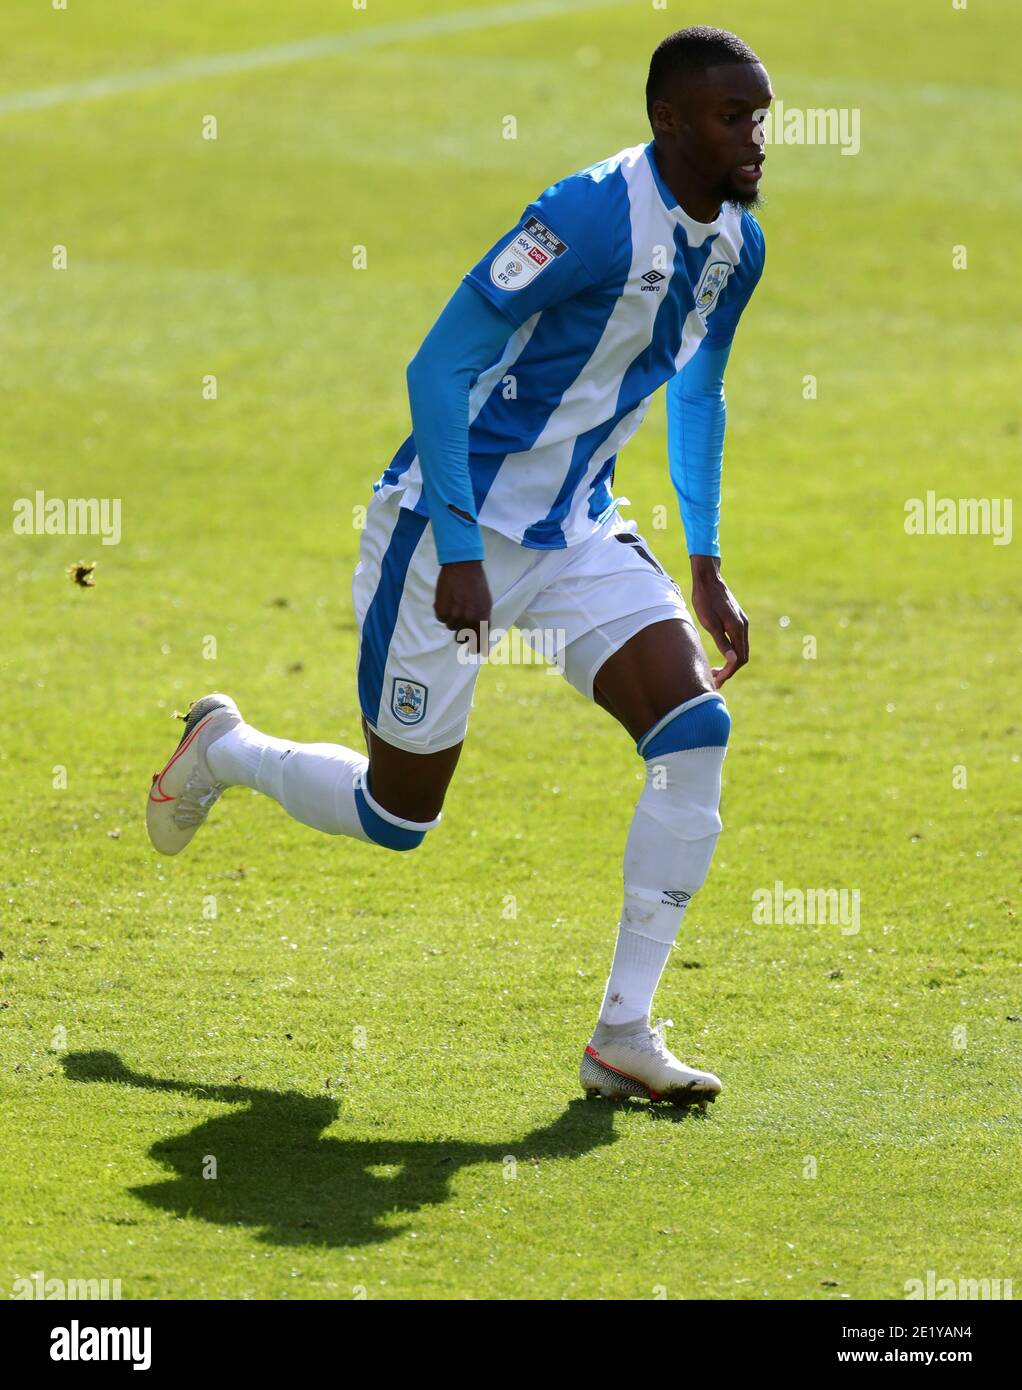 Huddersfield Town's Adama Diakhaby during the Sky Bet Championship match at the John Smith's Stadium, Huddersfield. Picture date: Saturday September 12, 2020. See PA story SOCCER Huddersfield. Photo credit should read: Richard Sellers/PA Wire. EDITORIAL USE ONLY No use with unauthorised audio, video, data, fixture lists, club/league logos or 'live' services. Online in-match use limited to 120 images, no video emulation. No use in betting, games or single club/league/player publications. Stock Photo